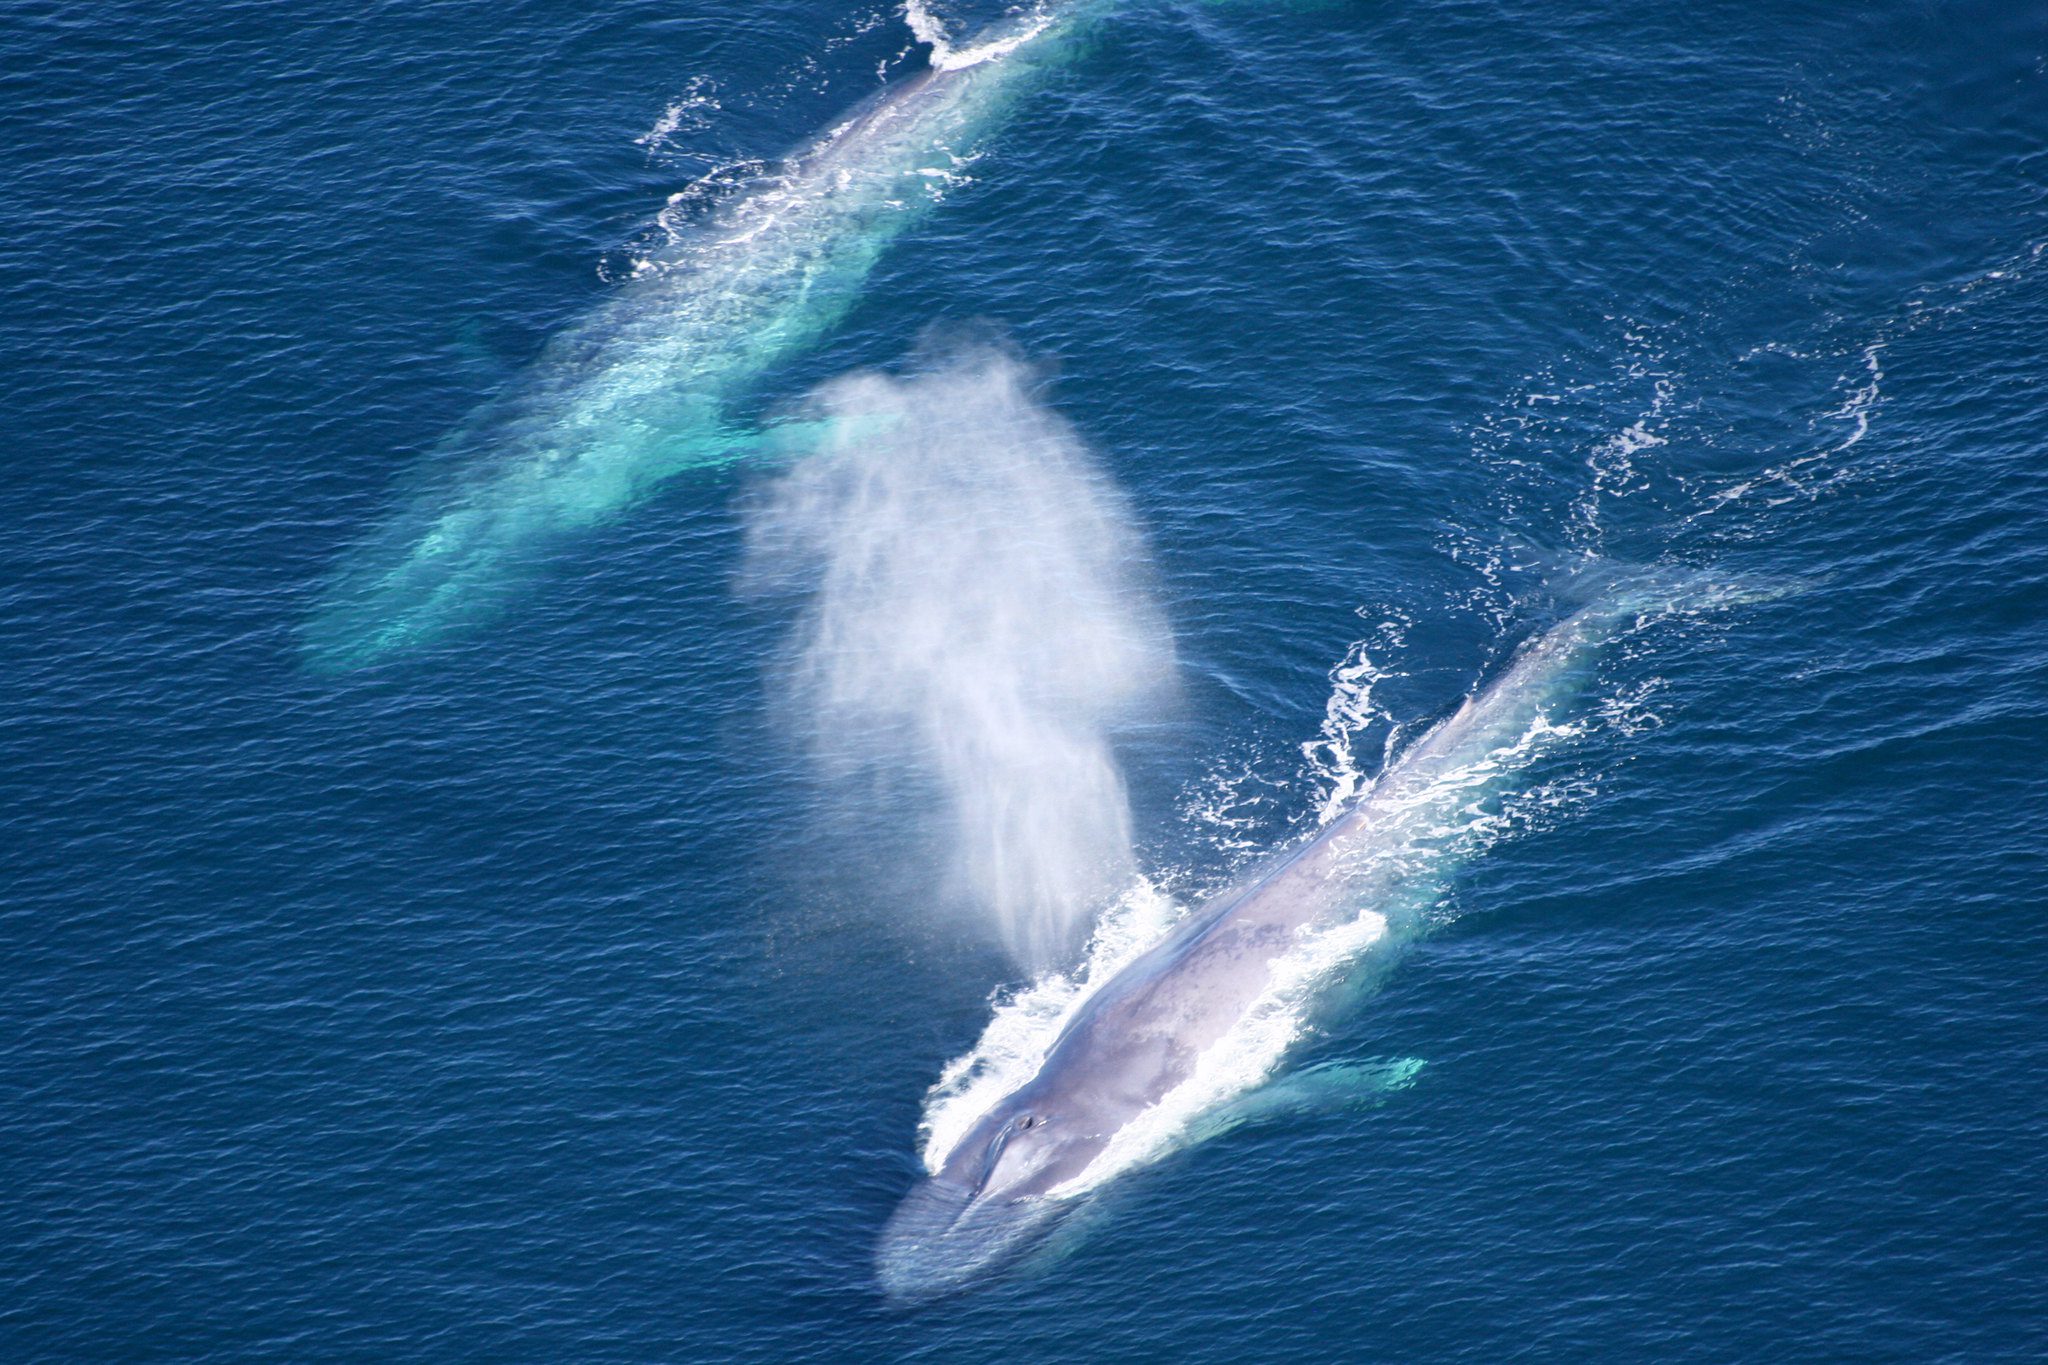 Global shipping companies reduced speeds off California coast to protect blue whales and blue skies